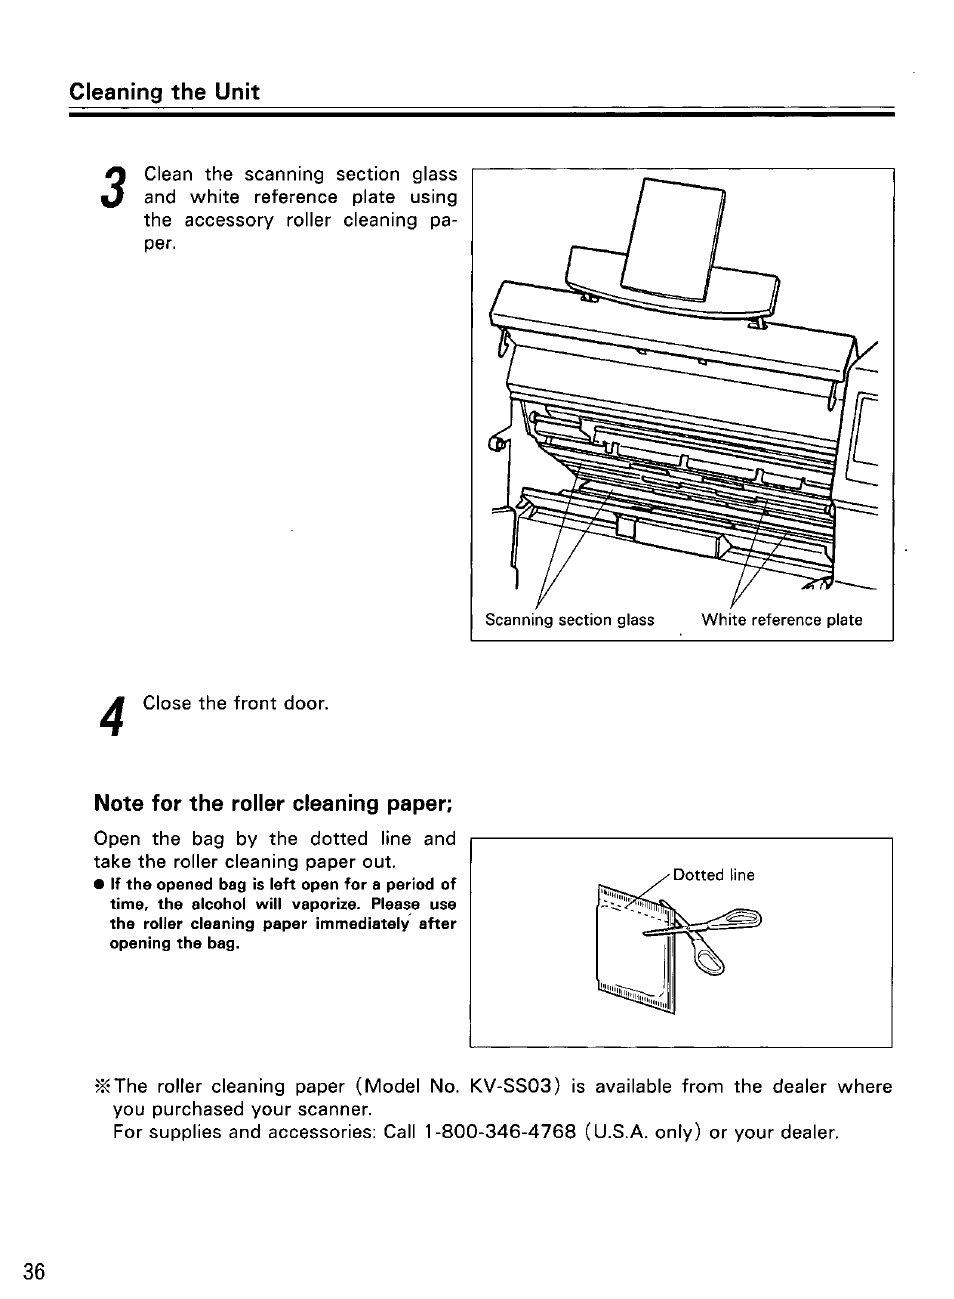 Note for the roller cleaning paper | Panasonic KV-SS855D User Manual | Page 36 / 48